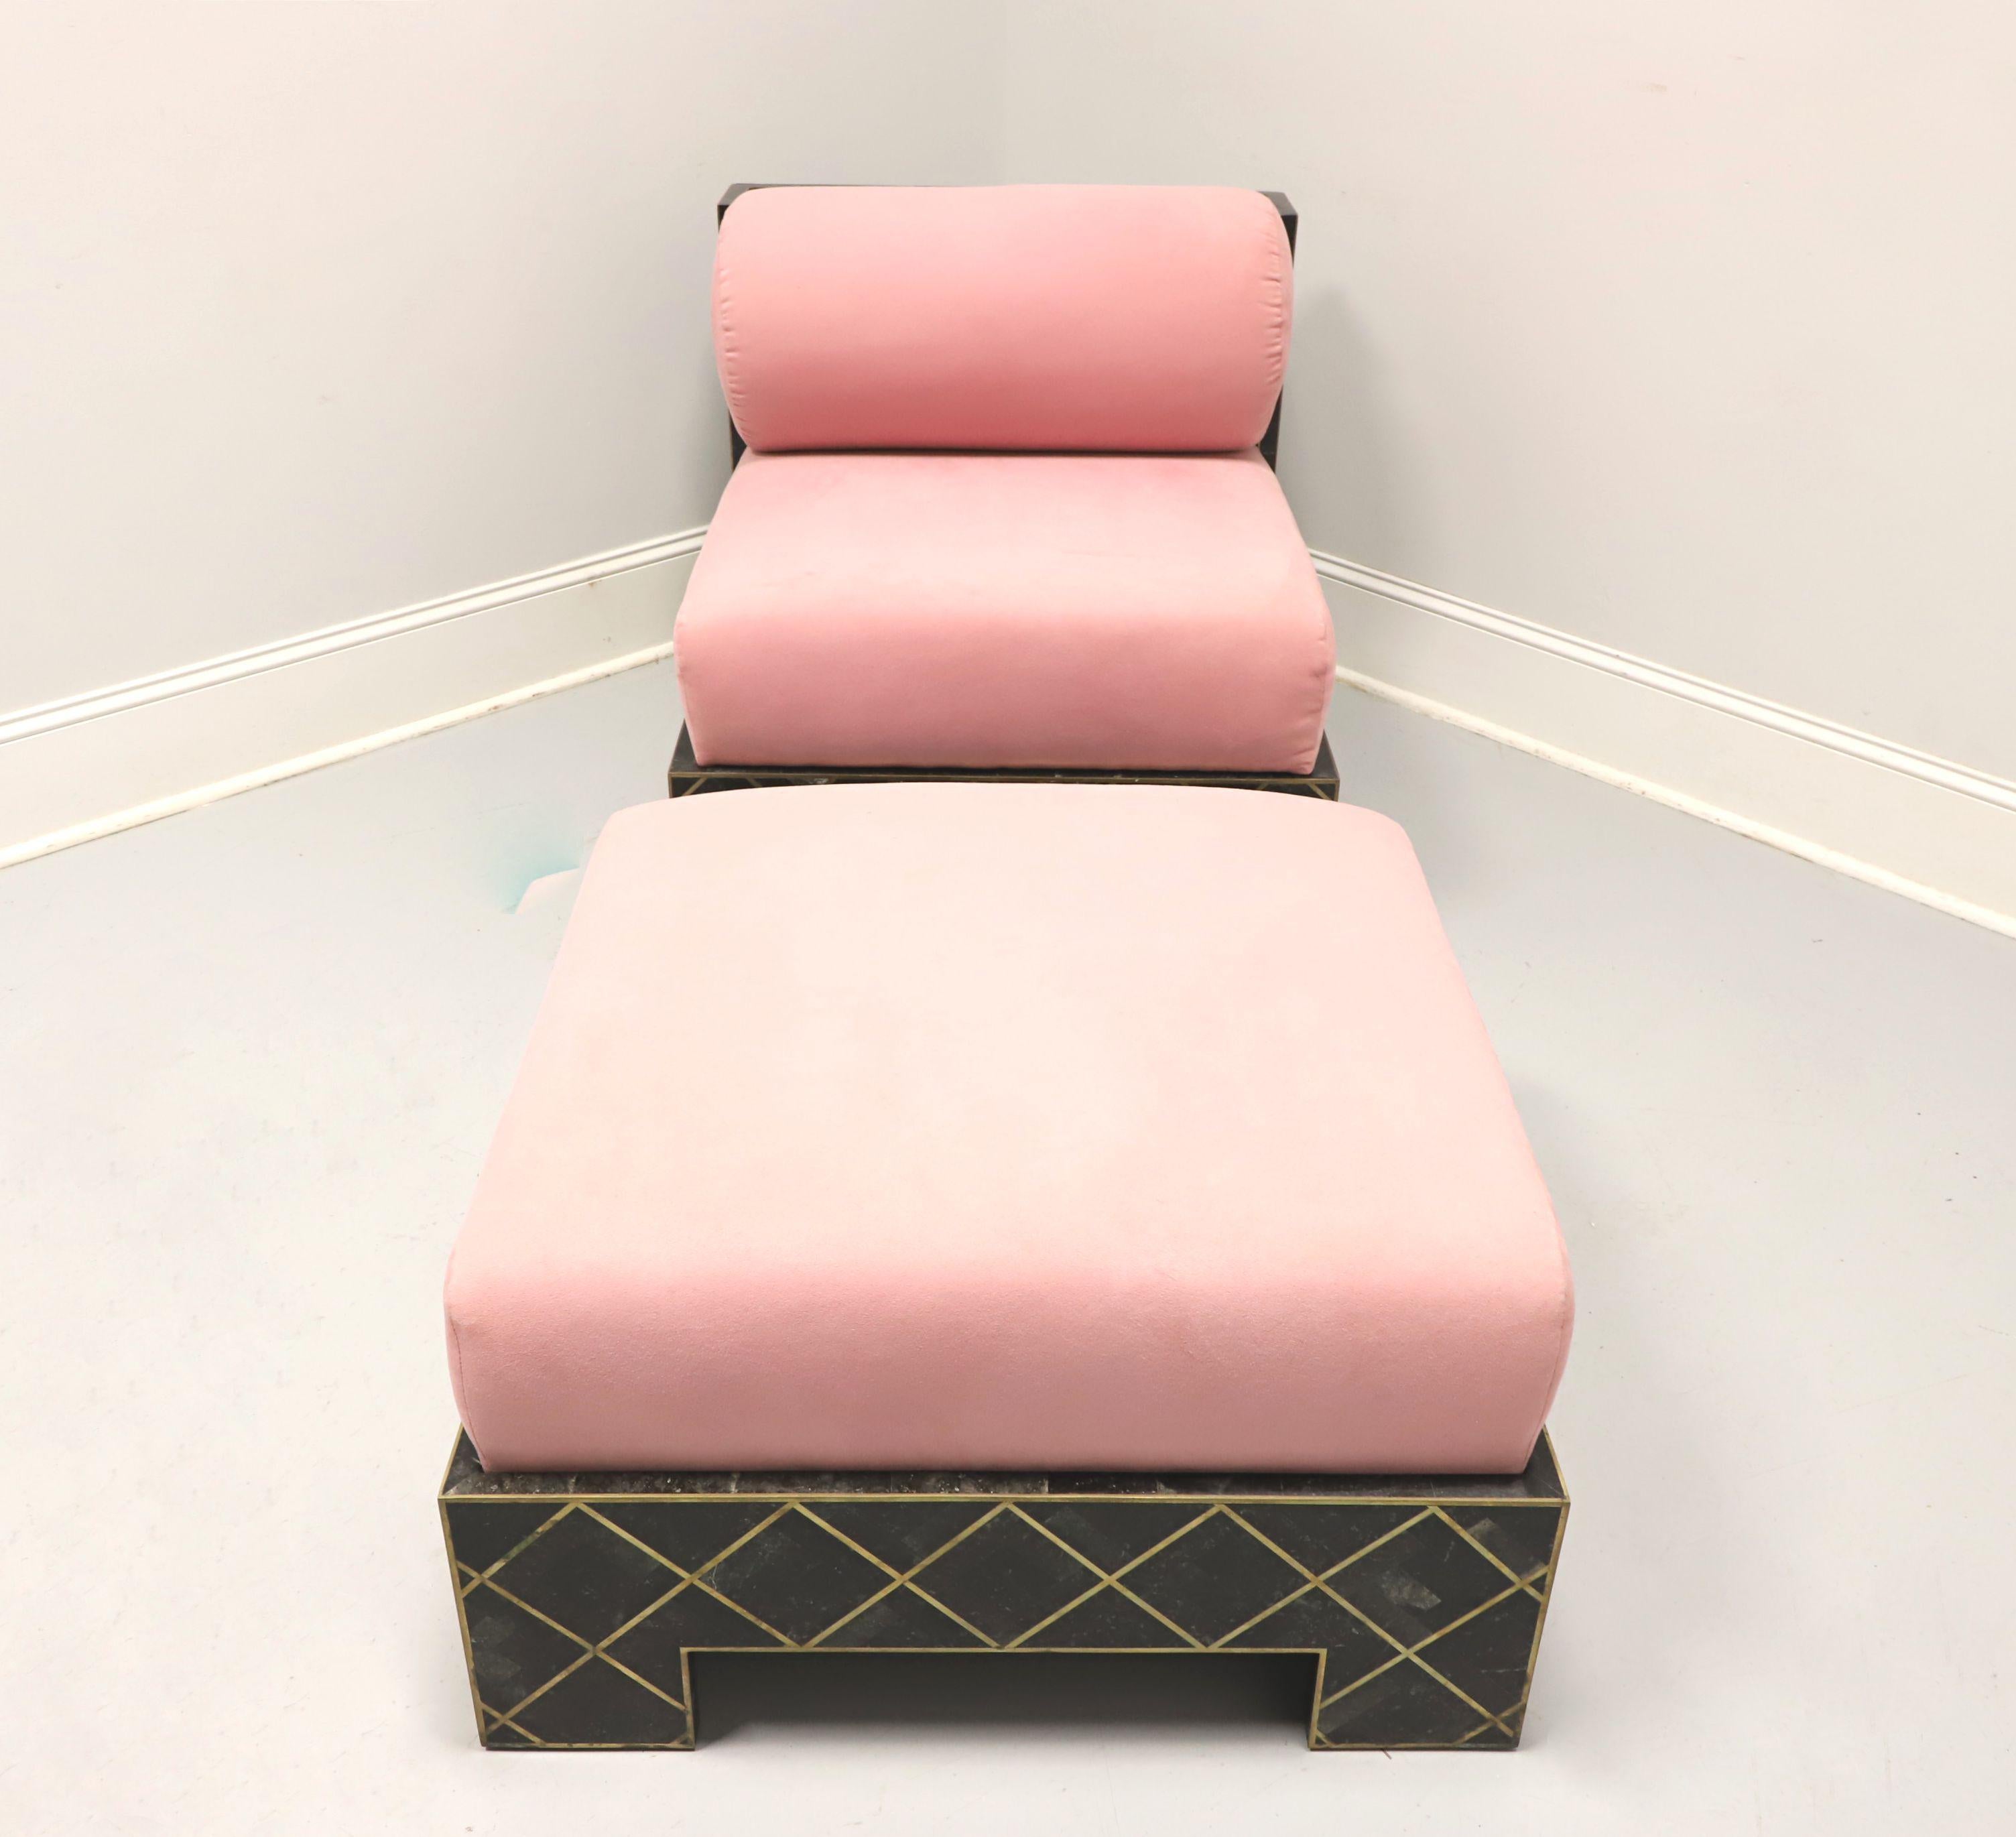 An Art Deco style two piece chaise lounge by Maitland Smith. Solid wood frame with tessellated dark green/black marble veneers, brass gold strips trim forming a diamond pattern throughout, pink velvet like fabric upholstered removable extra thick